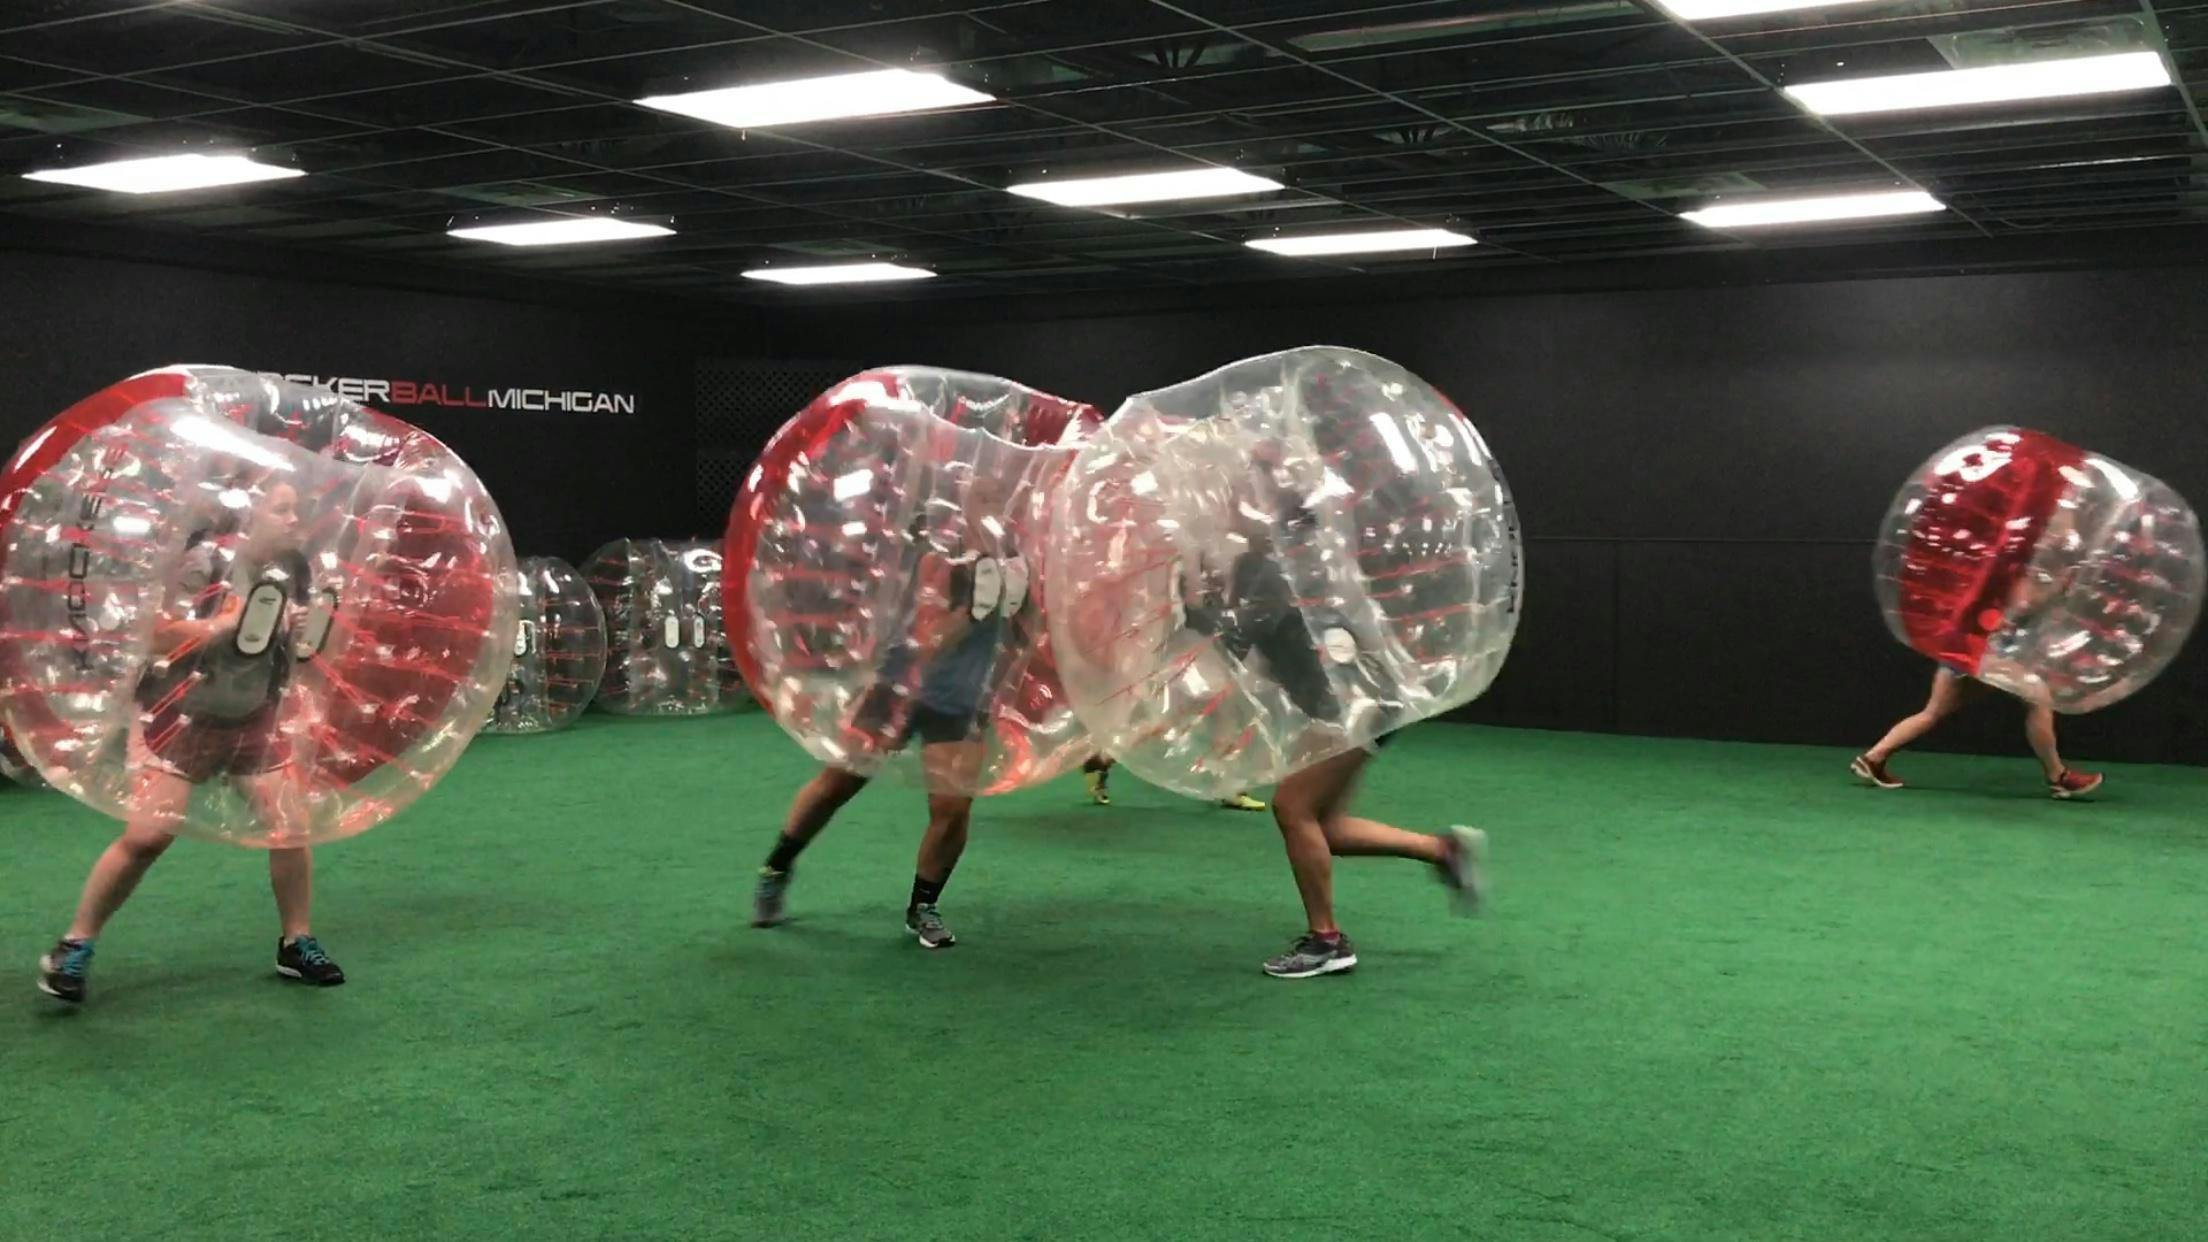 Knockerball Battle Royale!- Only $15 to play as long as you want!